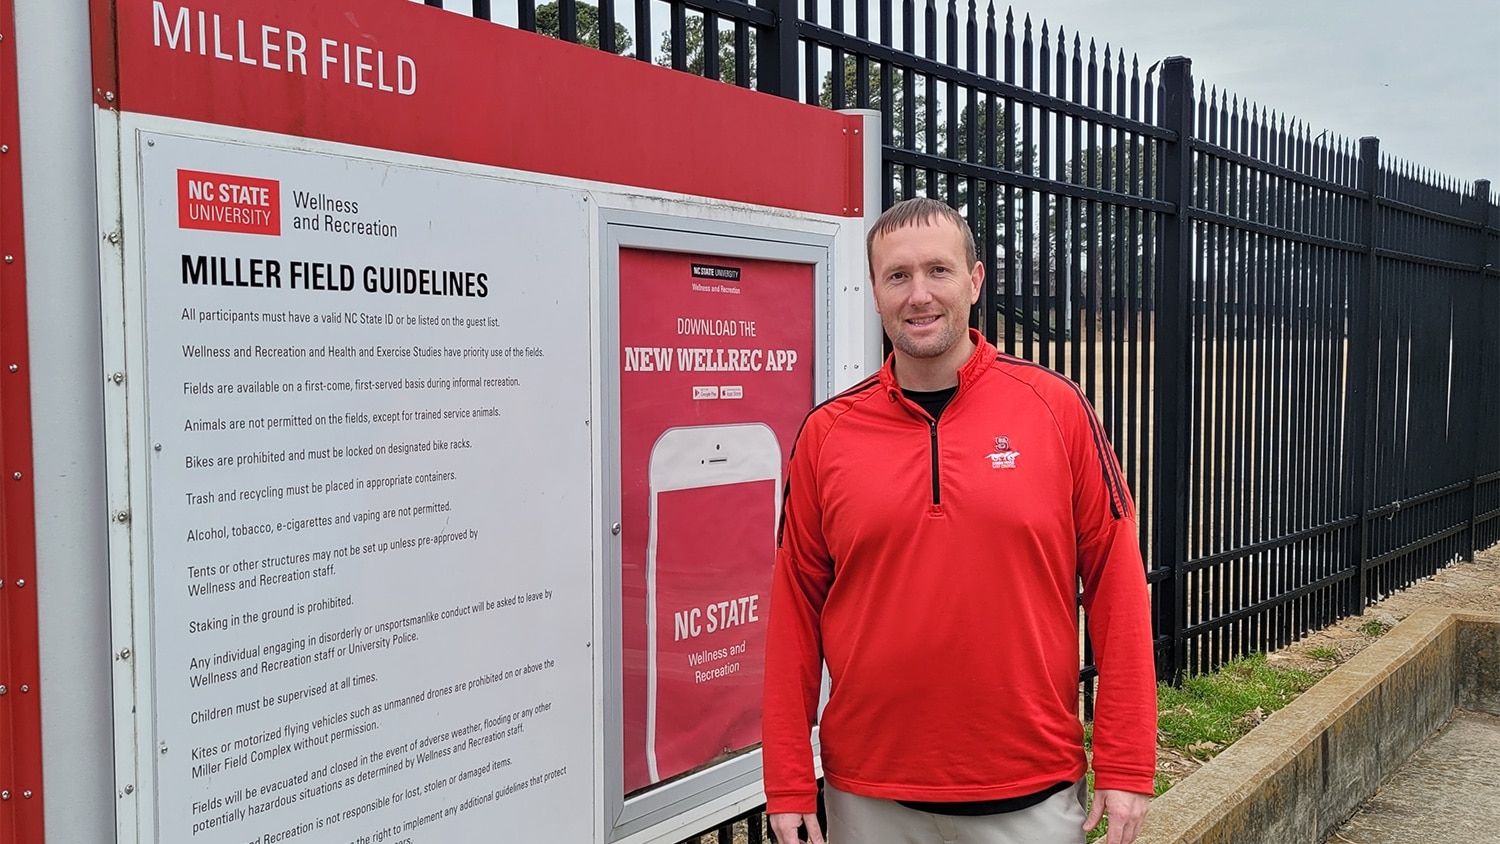 Ben Strunk stands next to a large sign for Miller Fields